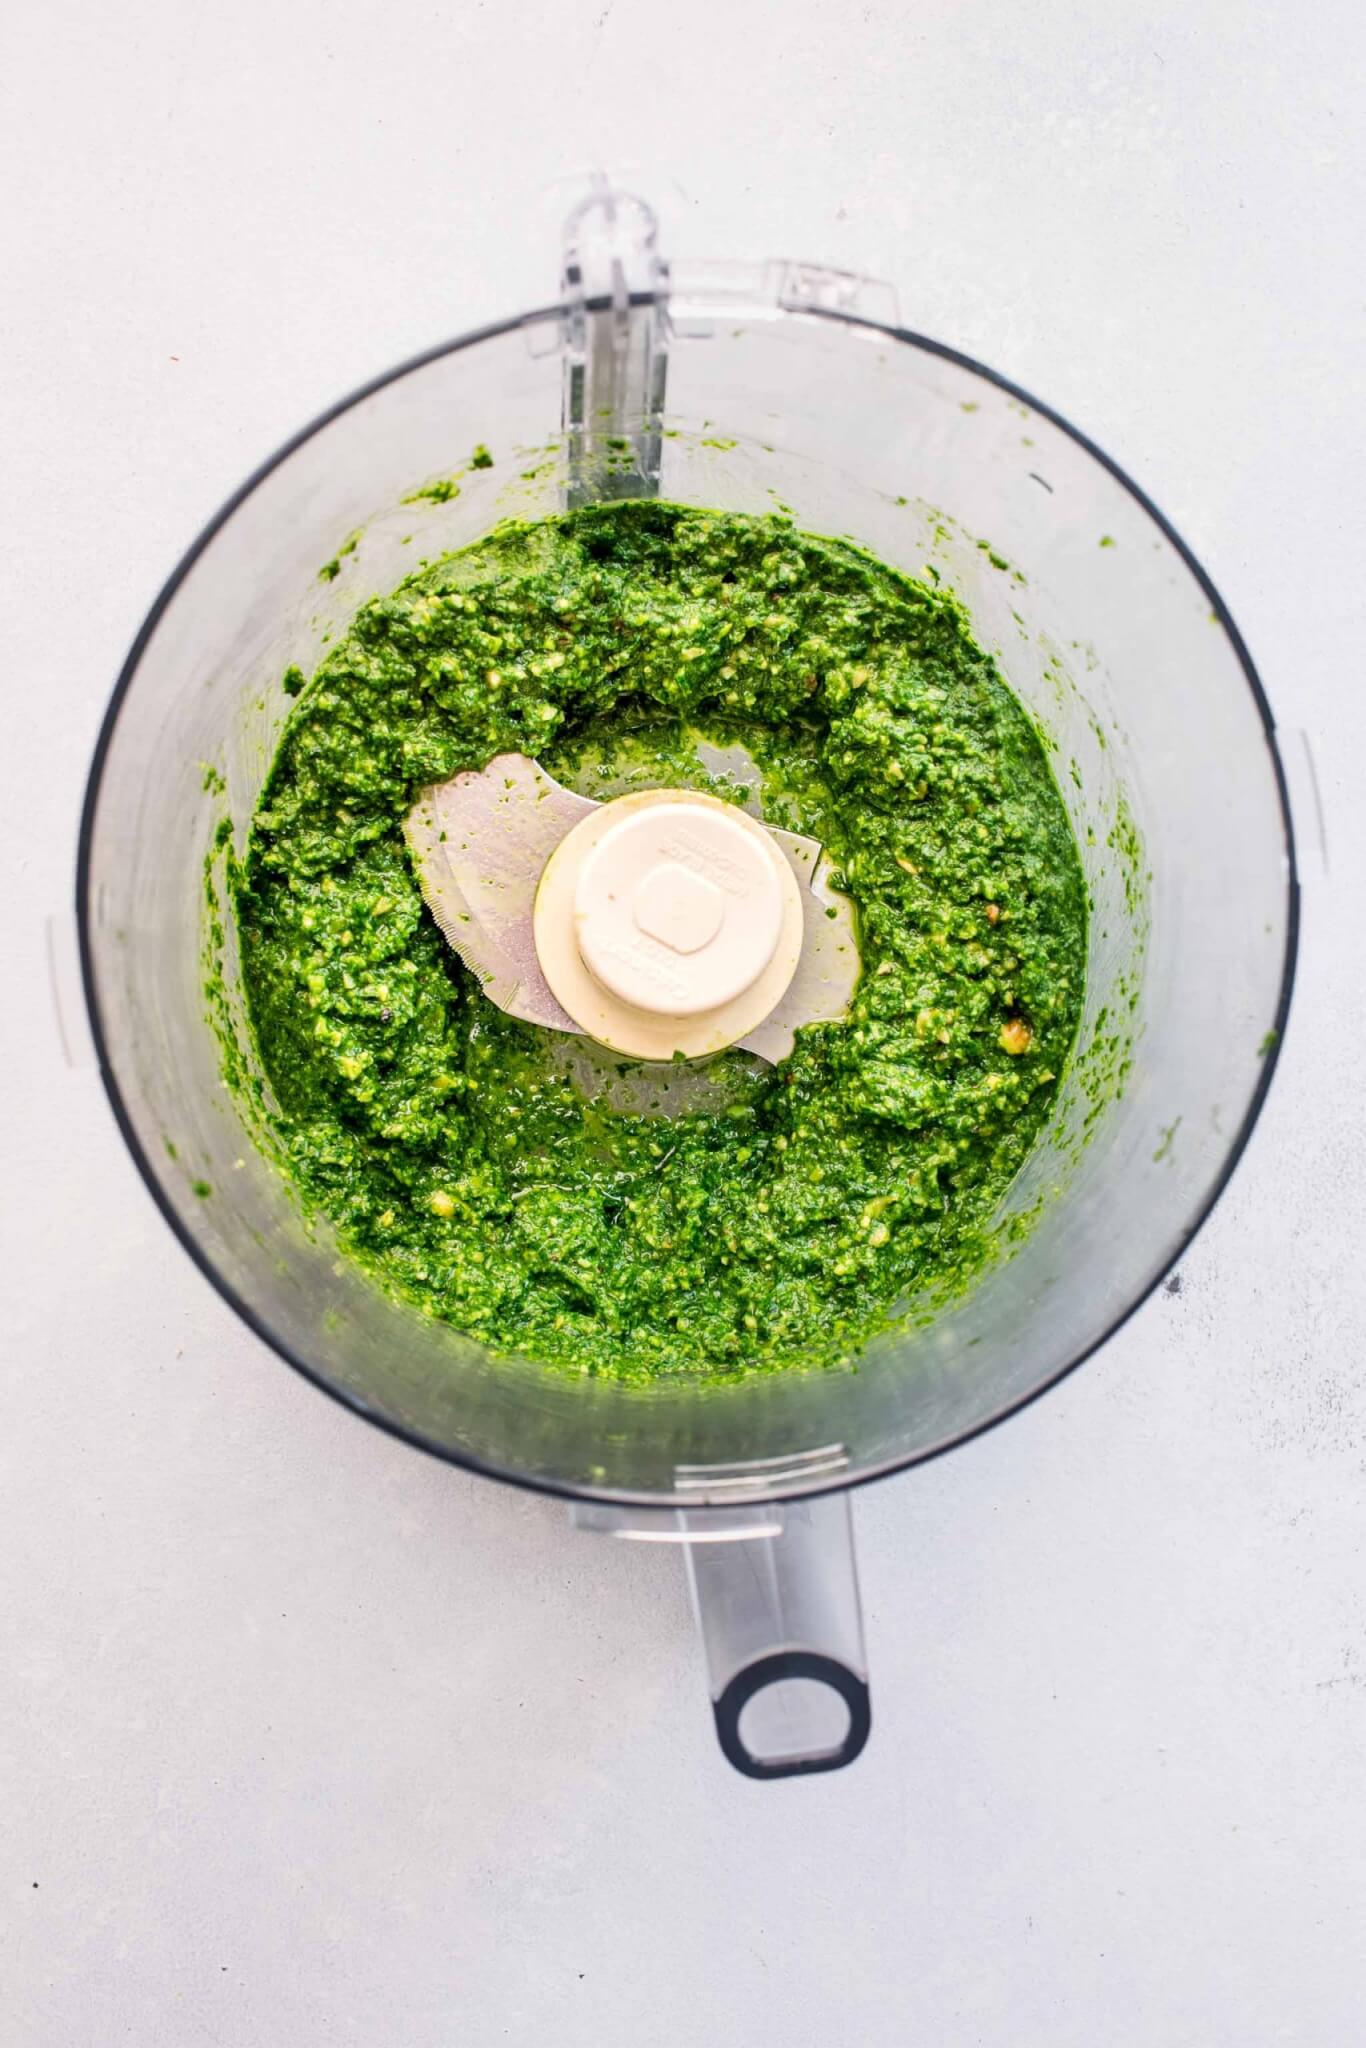 Kale pesto in food processor after processing.